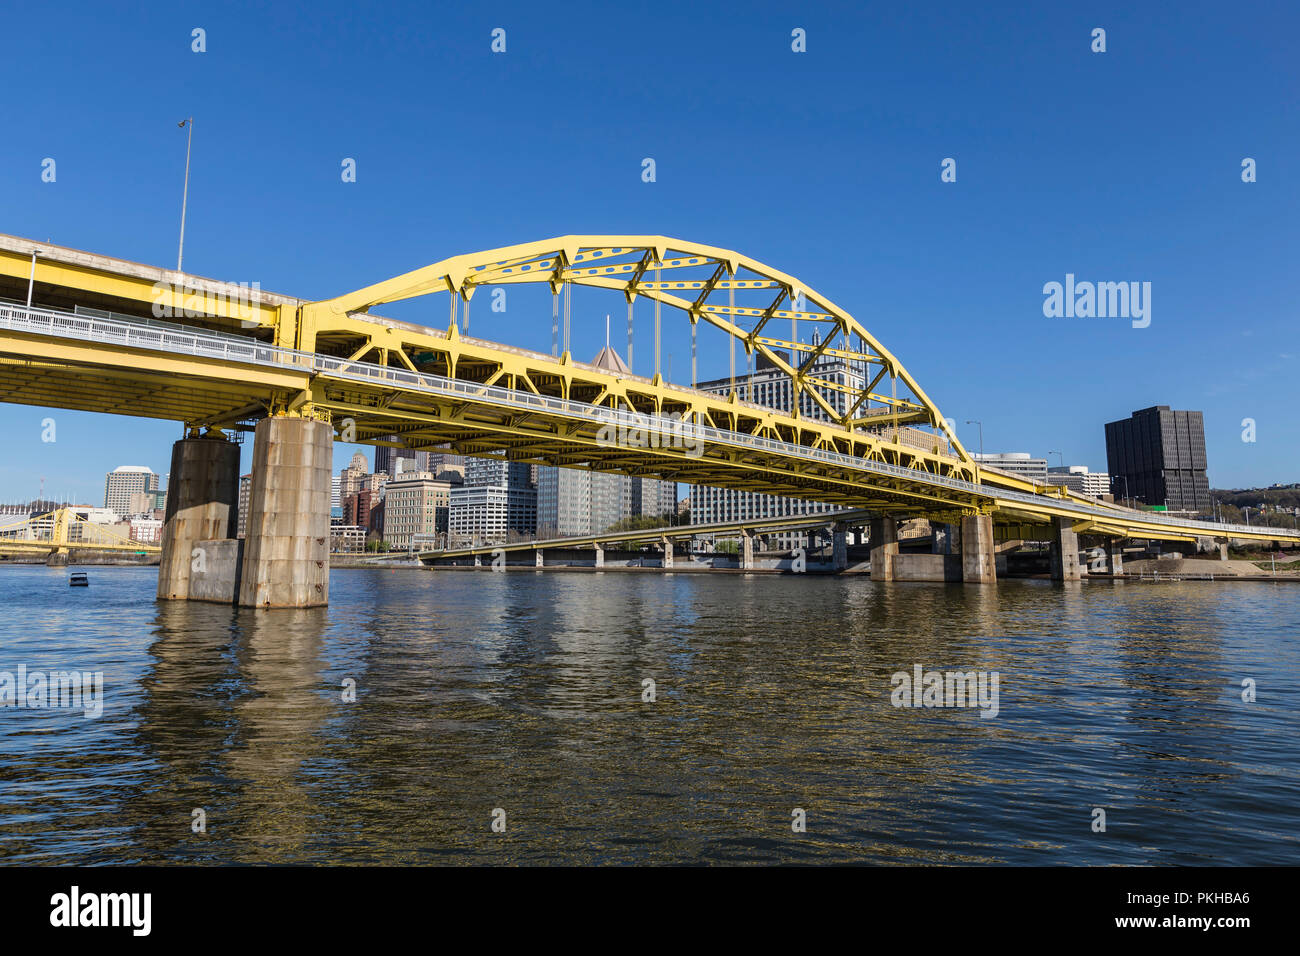 Downtown urban waterfront and Route 279 bridge crossing the Allegheny and Ohio Rivers in Pittsburgh, Pennsylvania. Stock Photo